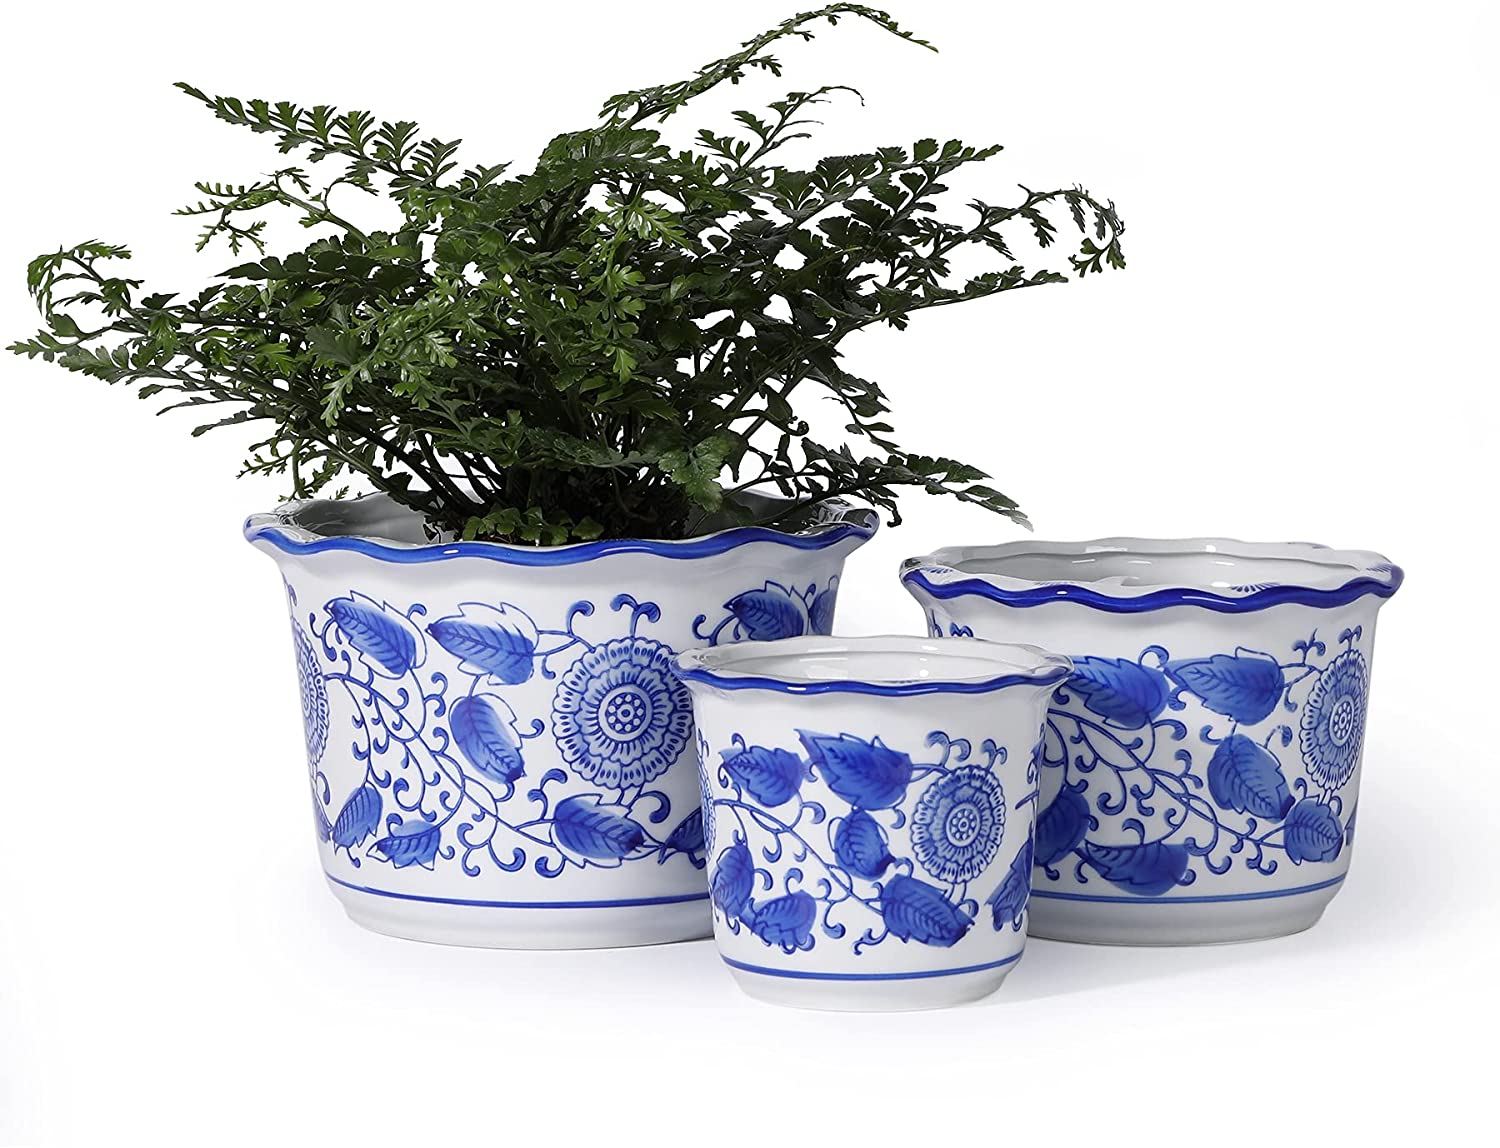 POTEY Blue and White Ceramic Plant Pots set of 3 $19.79 Free Shipping w/ Prime or on orders $25+